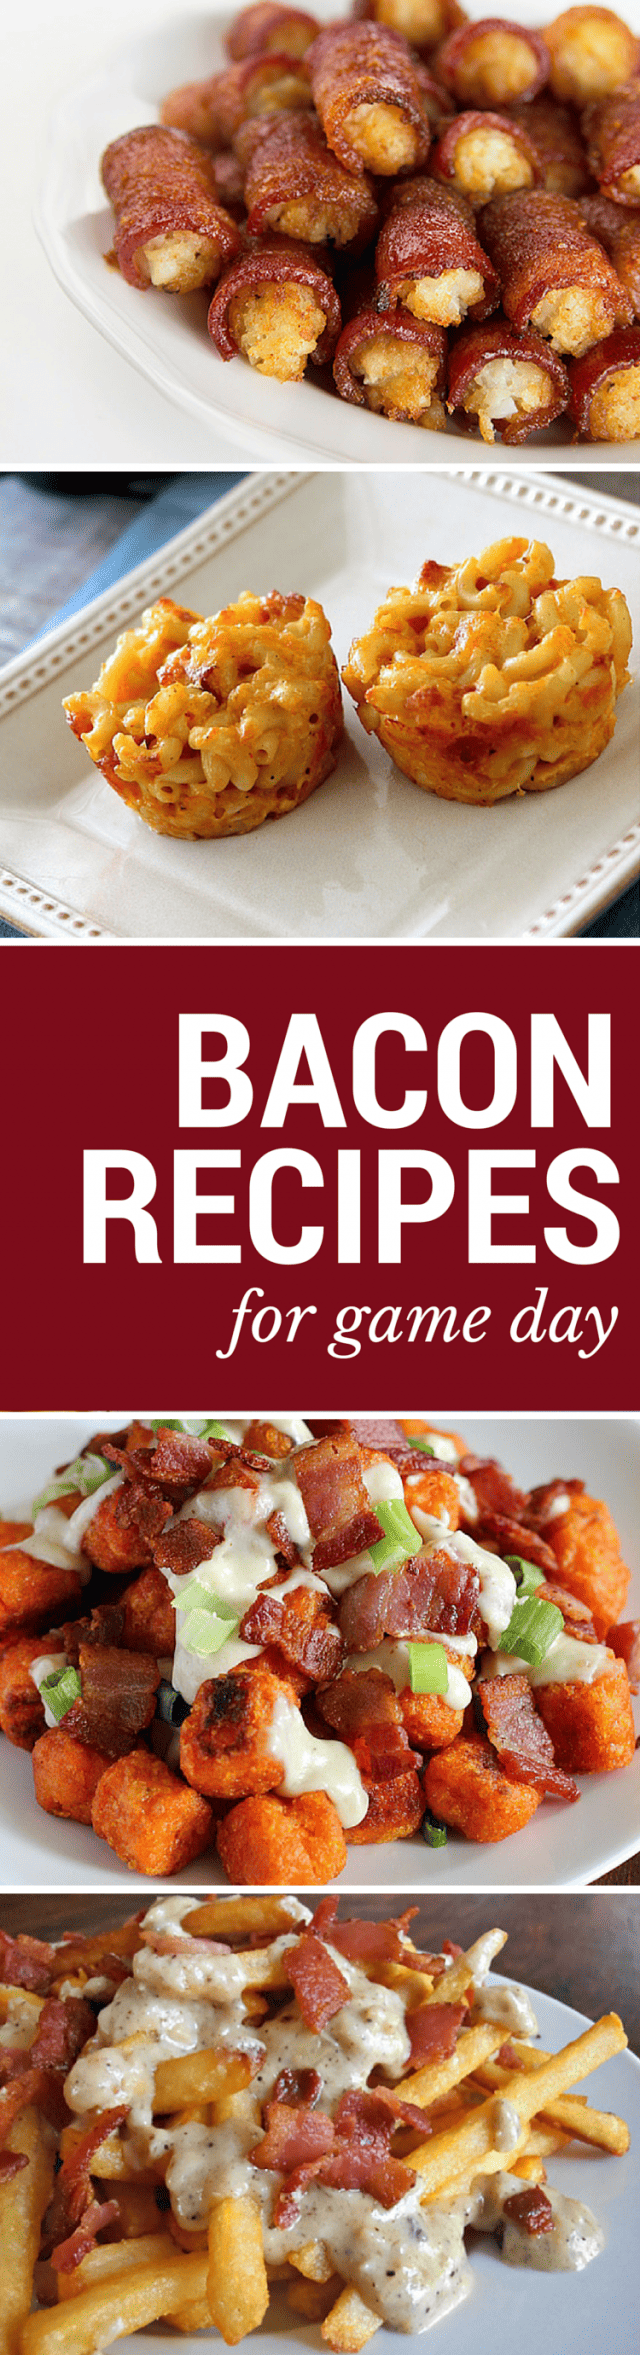 10 Over-the-Top Bacon Recipes for the Super Bowl